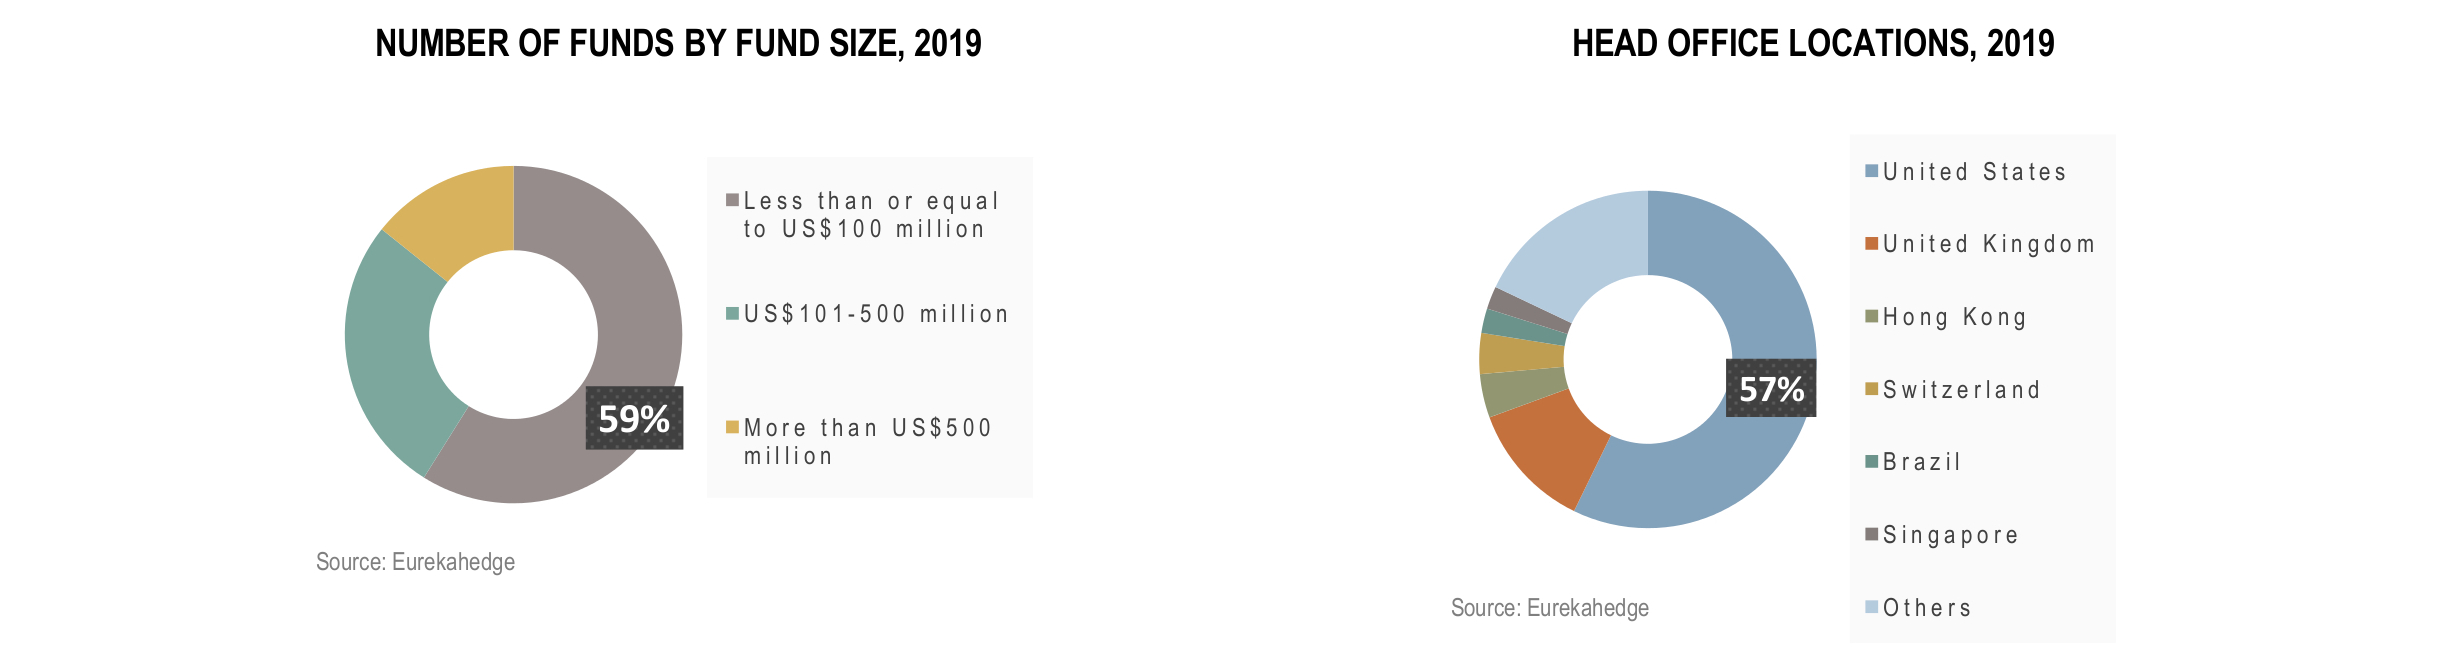 Global Hedge Funds Infographic April 2019 - funds by size and head office location